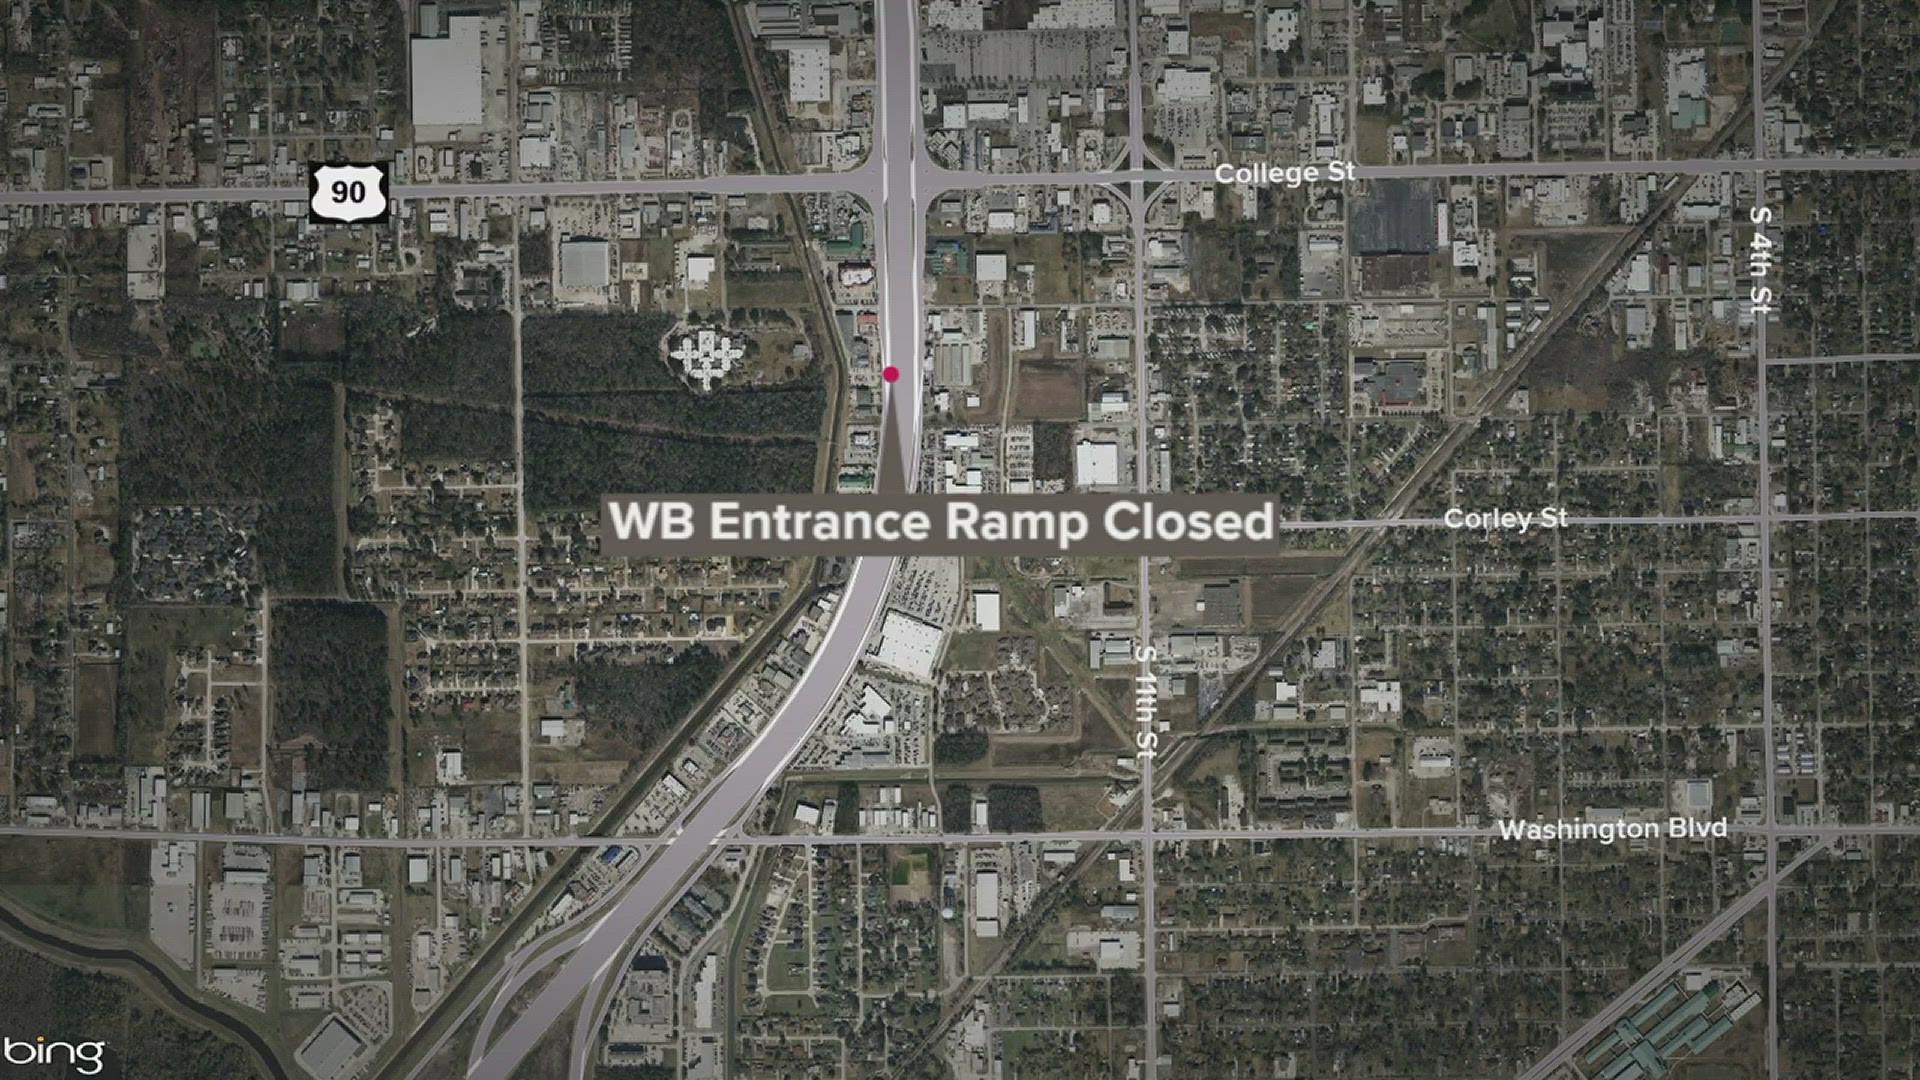 TxDOT says this entrance ramp will be closed for several months.